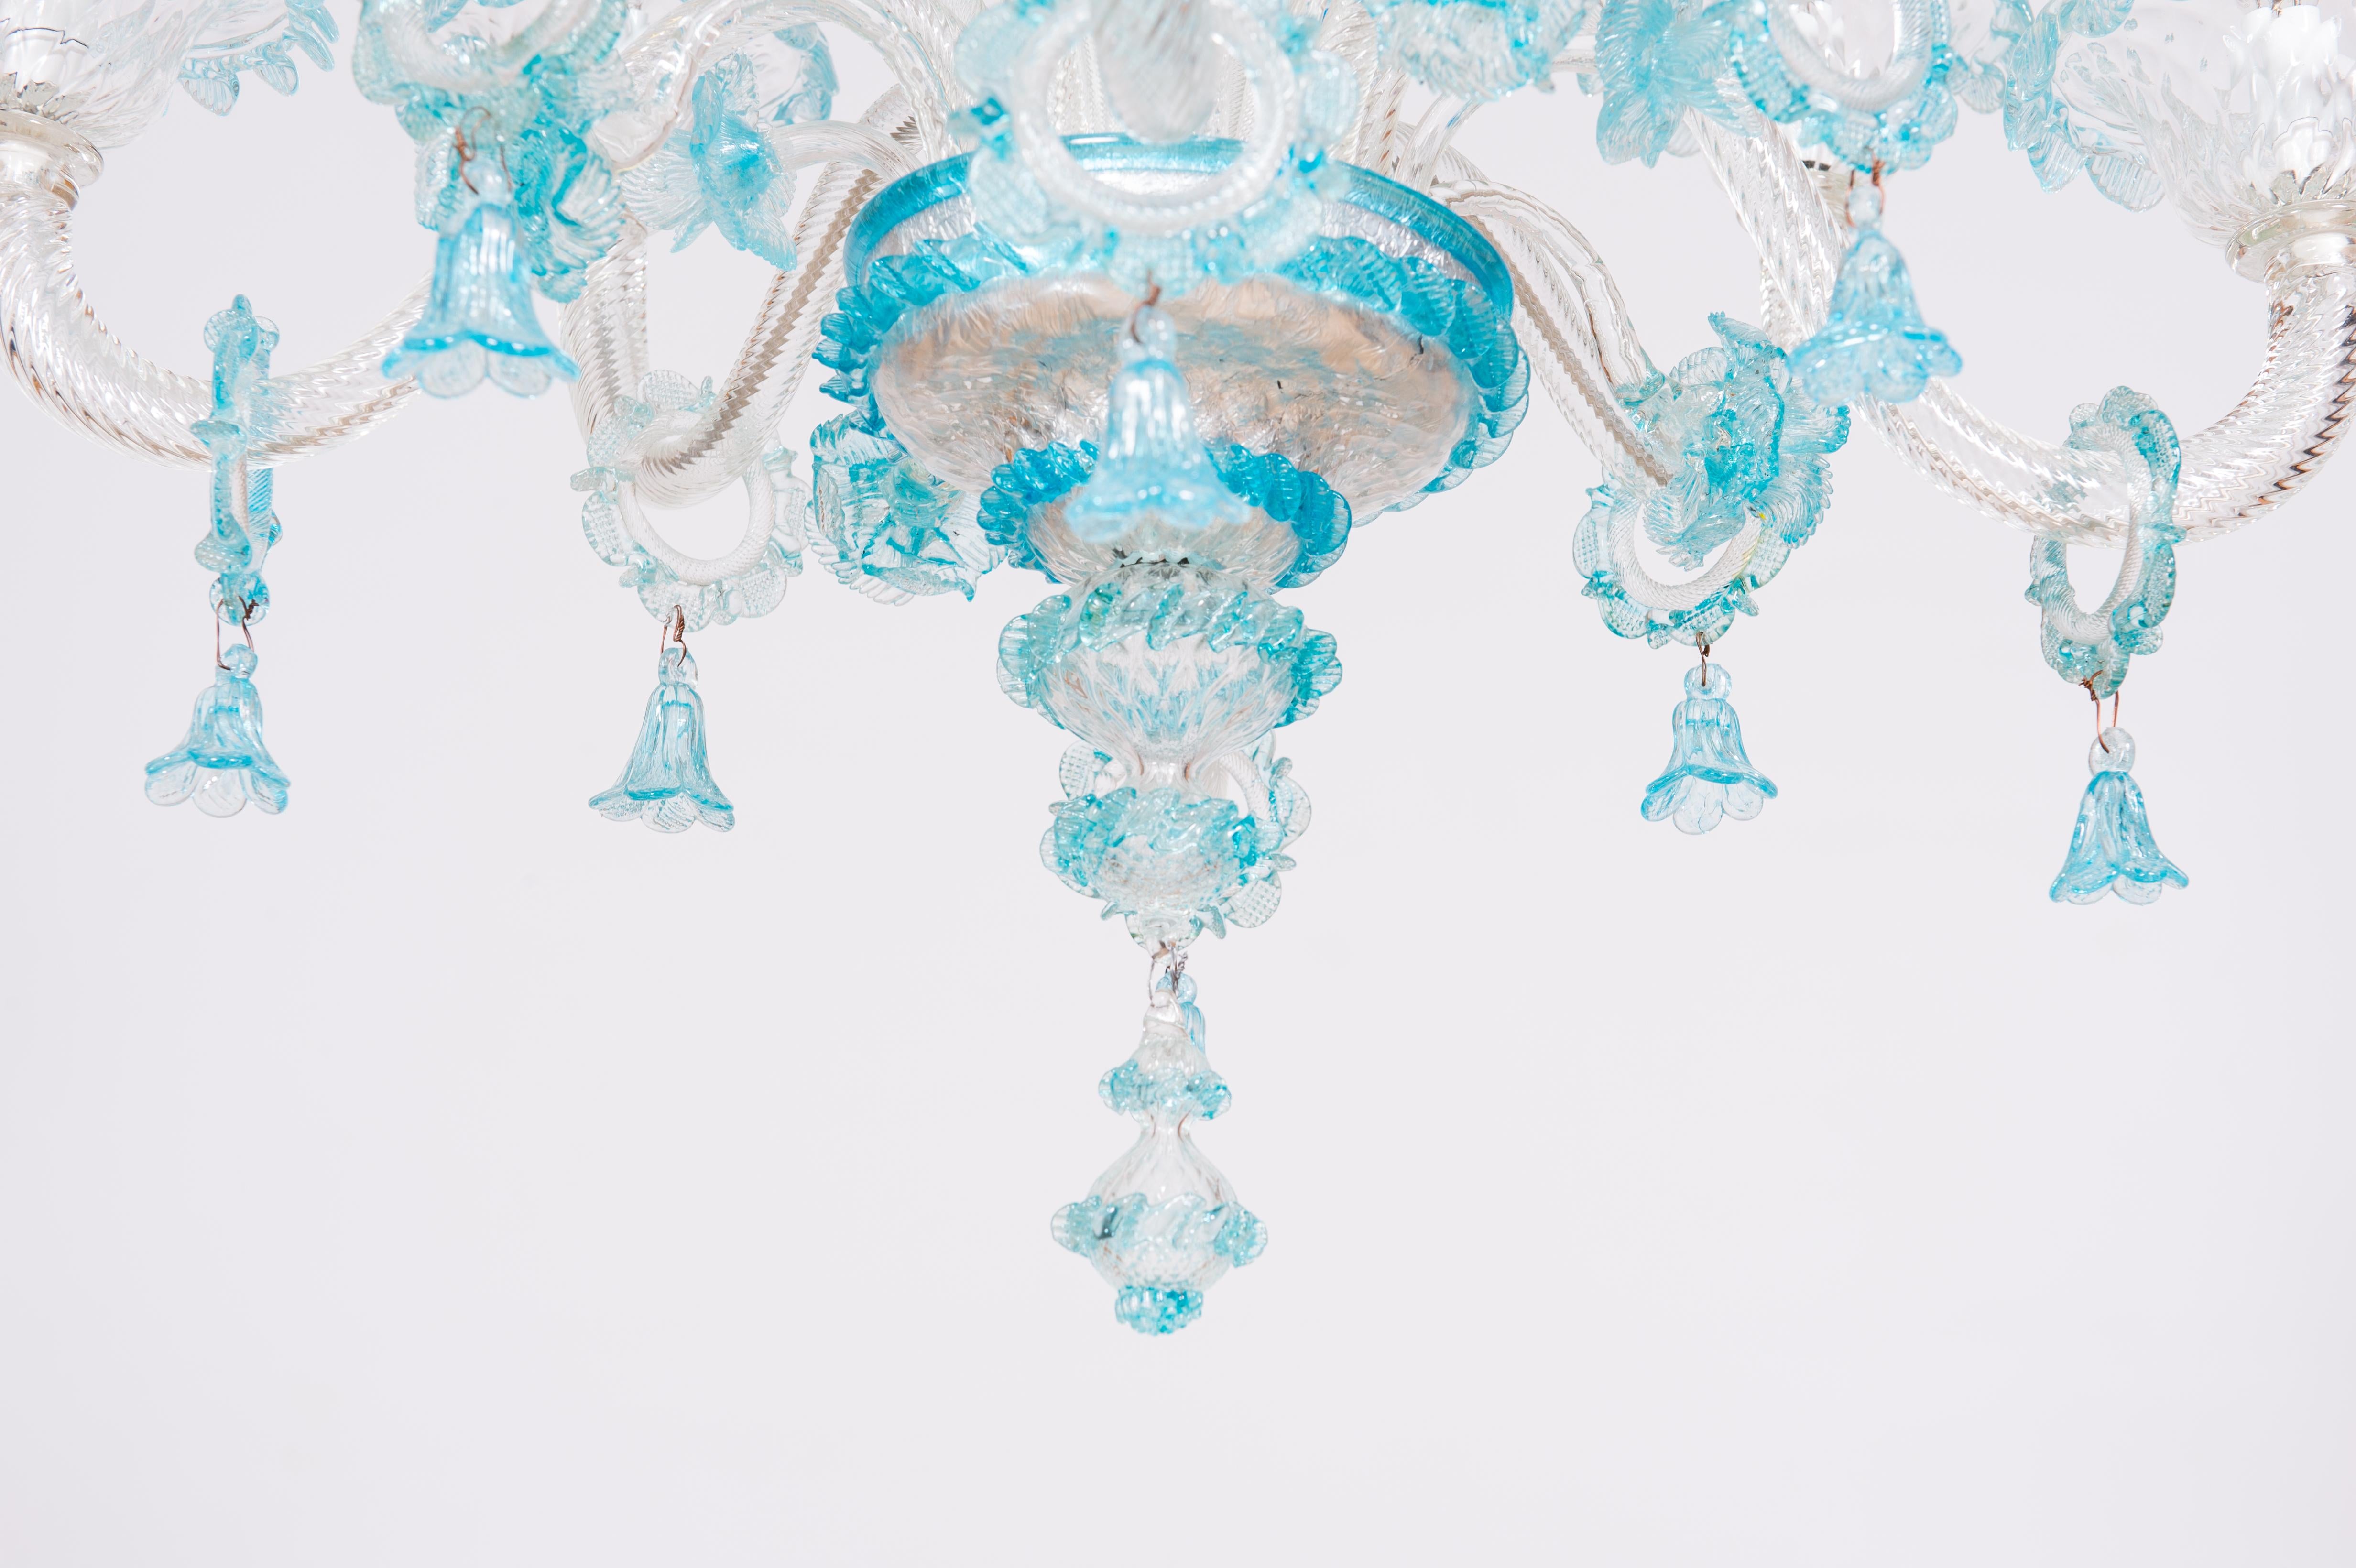 Mid-Century Modern Double Tiered Murano Glass Chandelier in vivid Blue Floral Patterns 1990s Italy For Sale